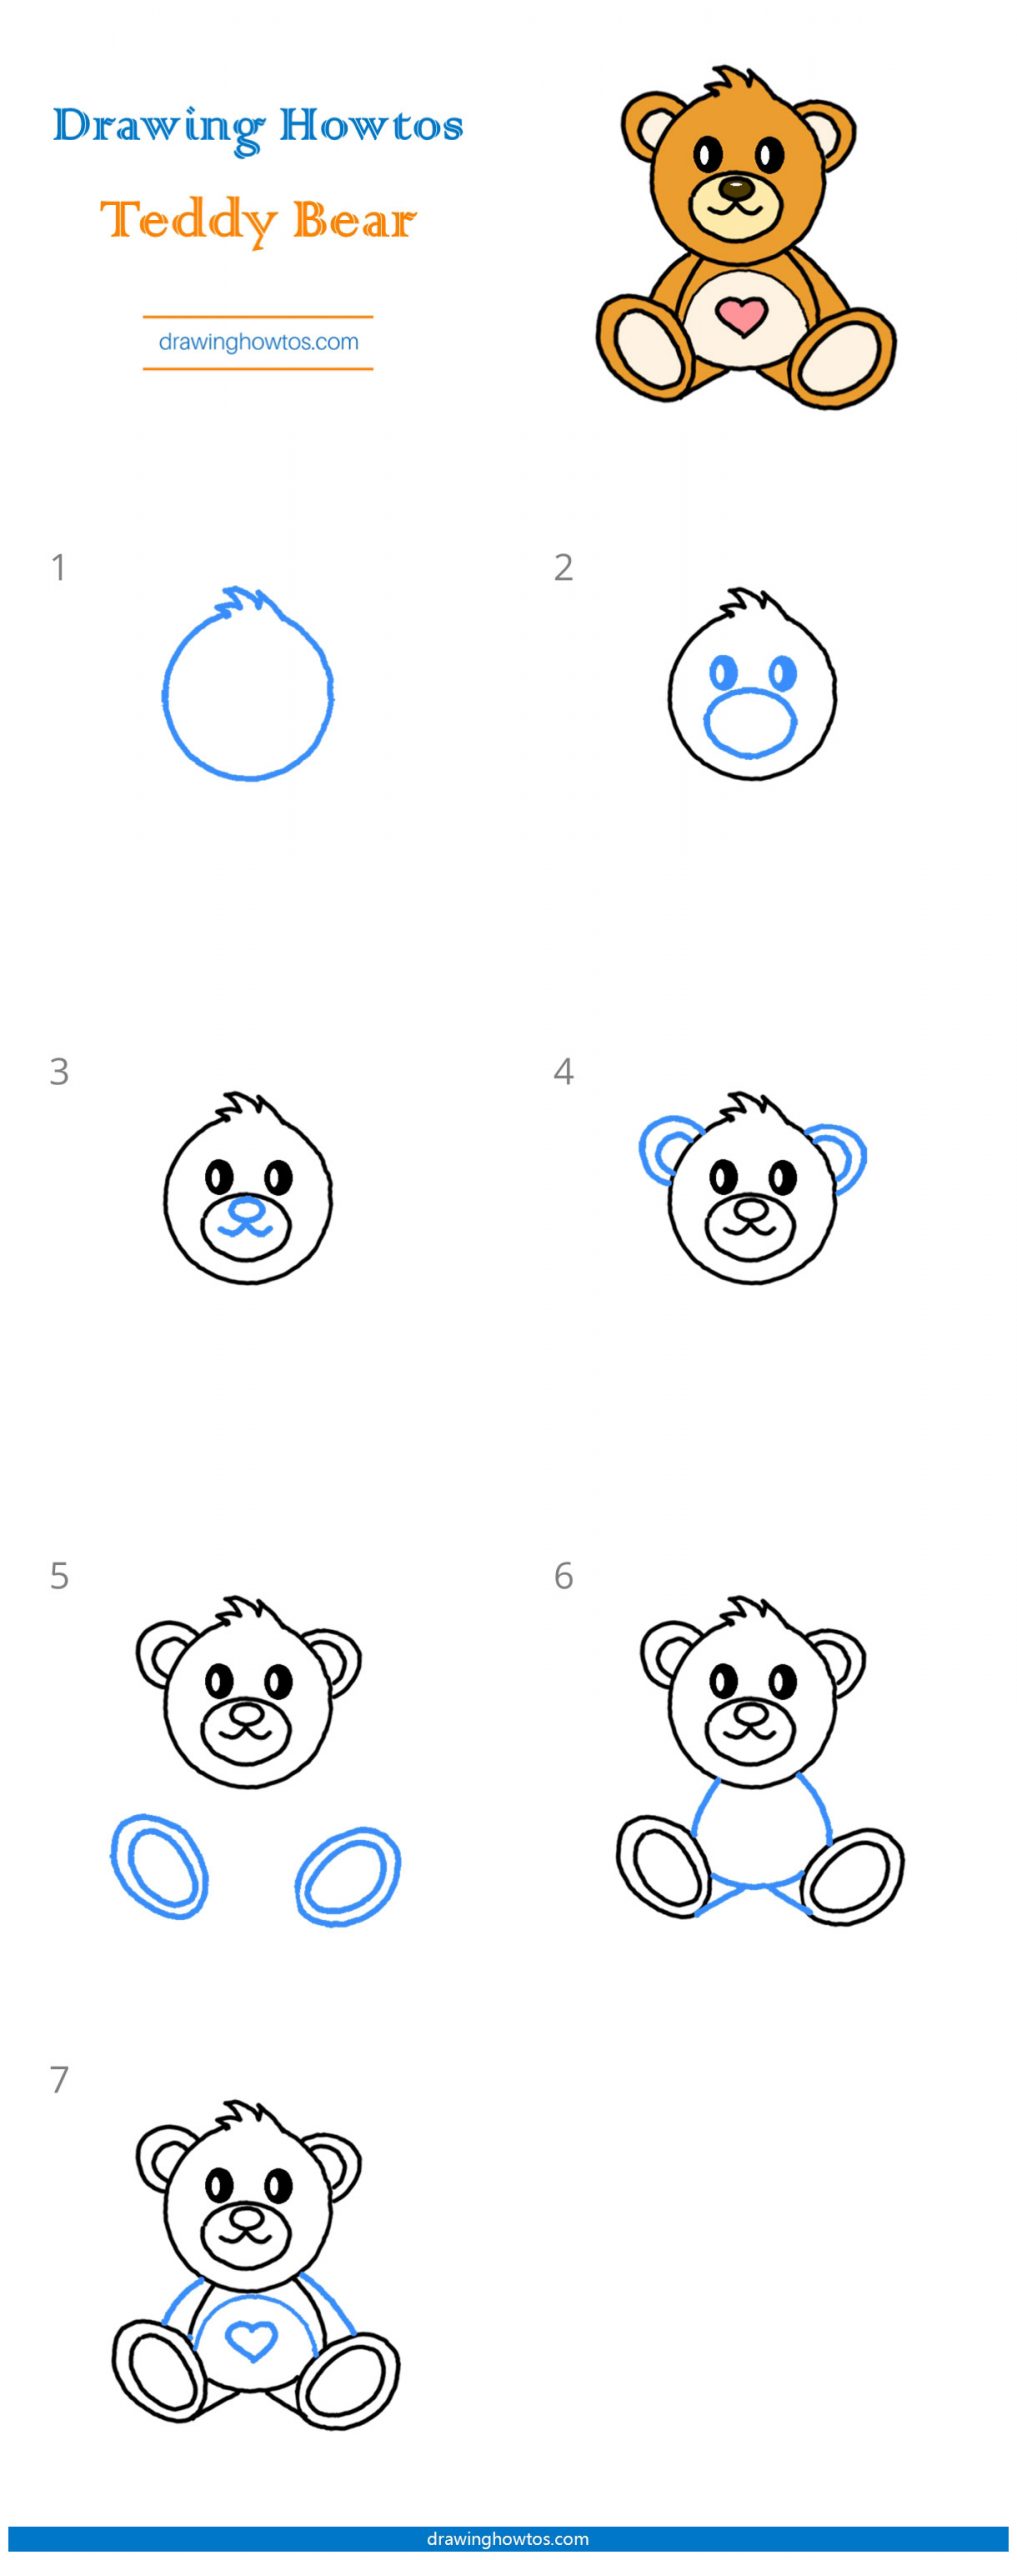 How to Draw a Teddy Bear Toy Step by Step